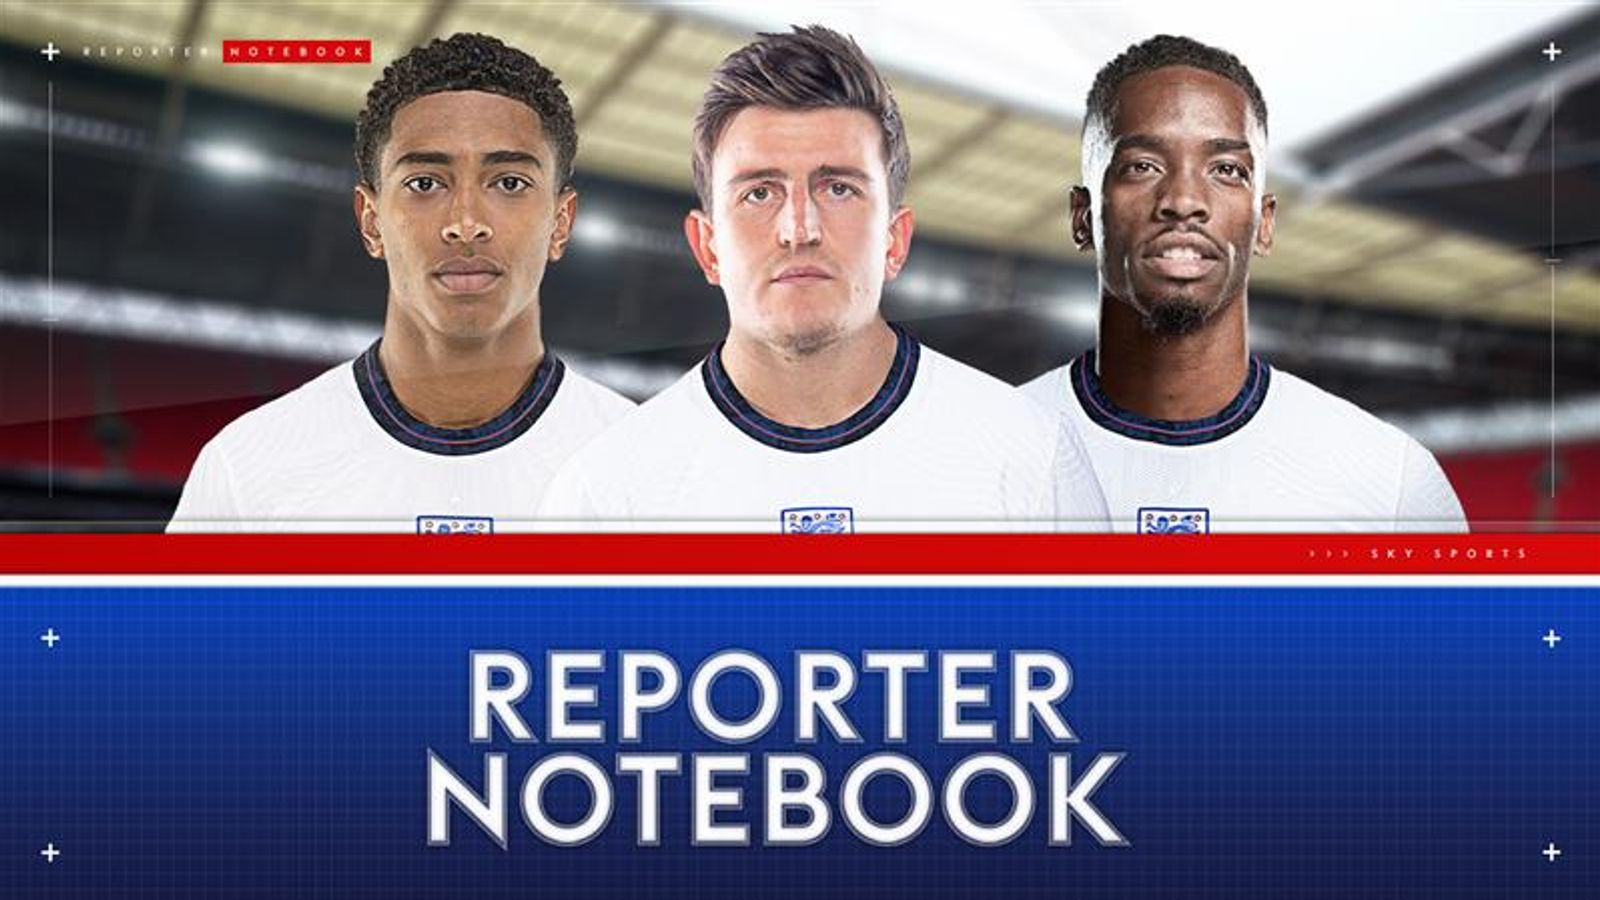 england-reporter-notebook-spotlight-on-ivan-toney-jude-bellingham-and-harry-maguire-ahead-of-nations-league-return